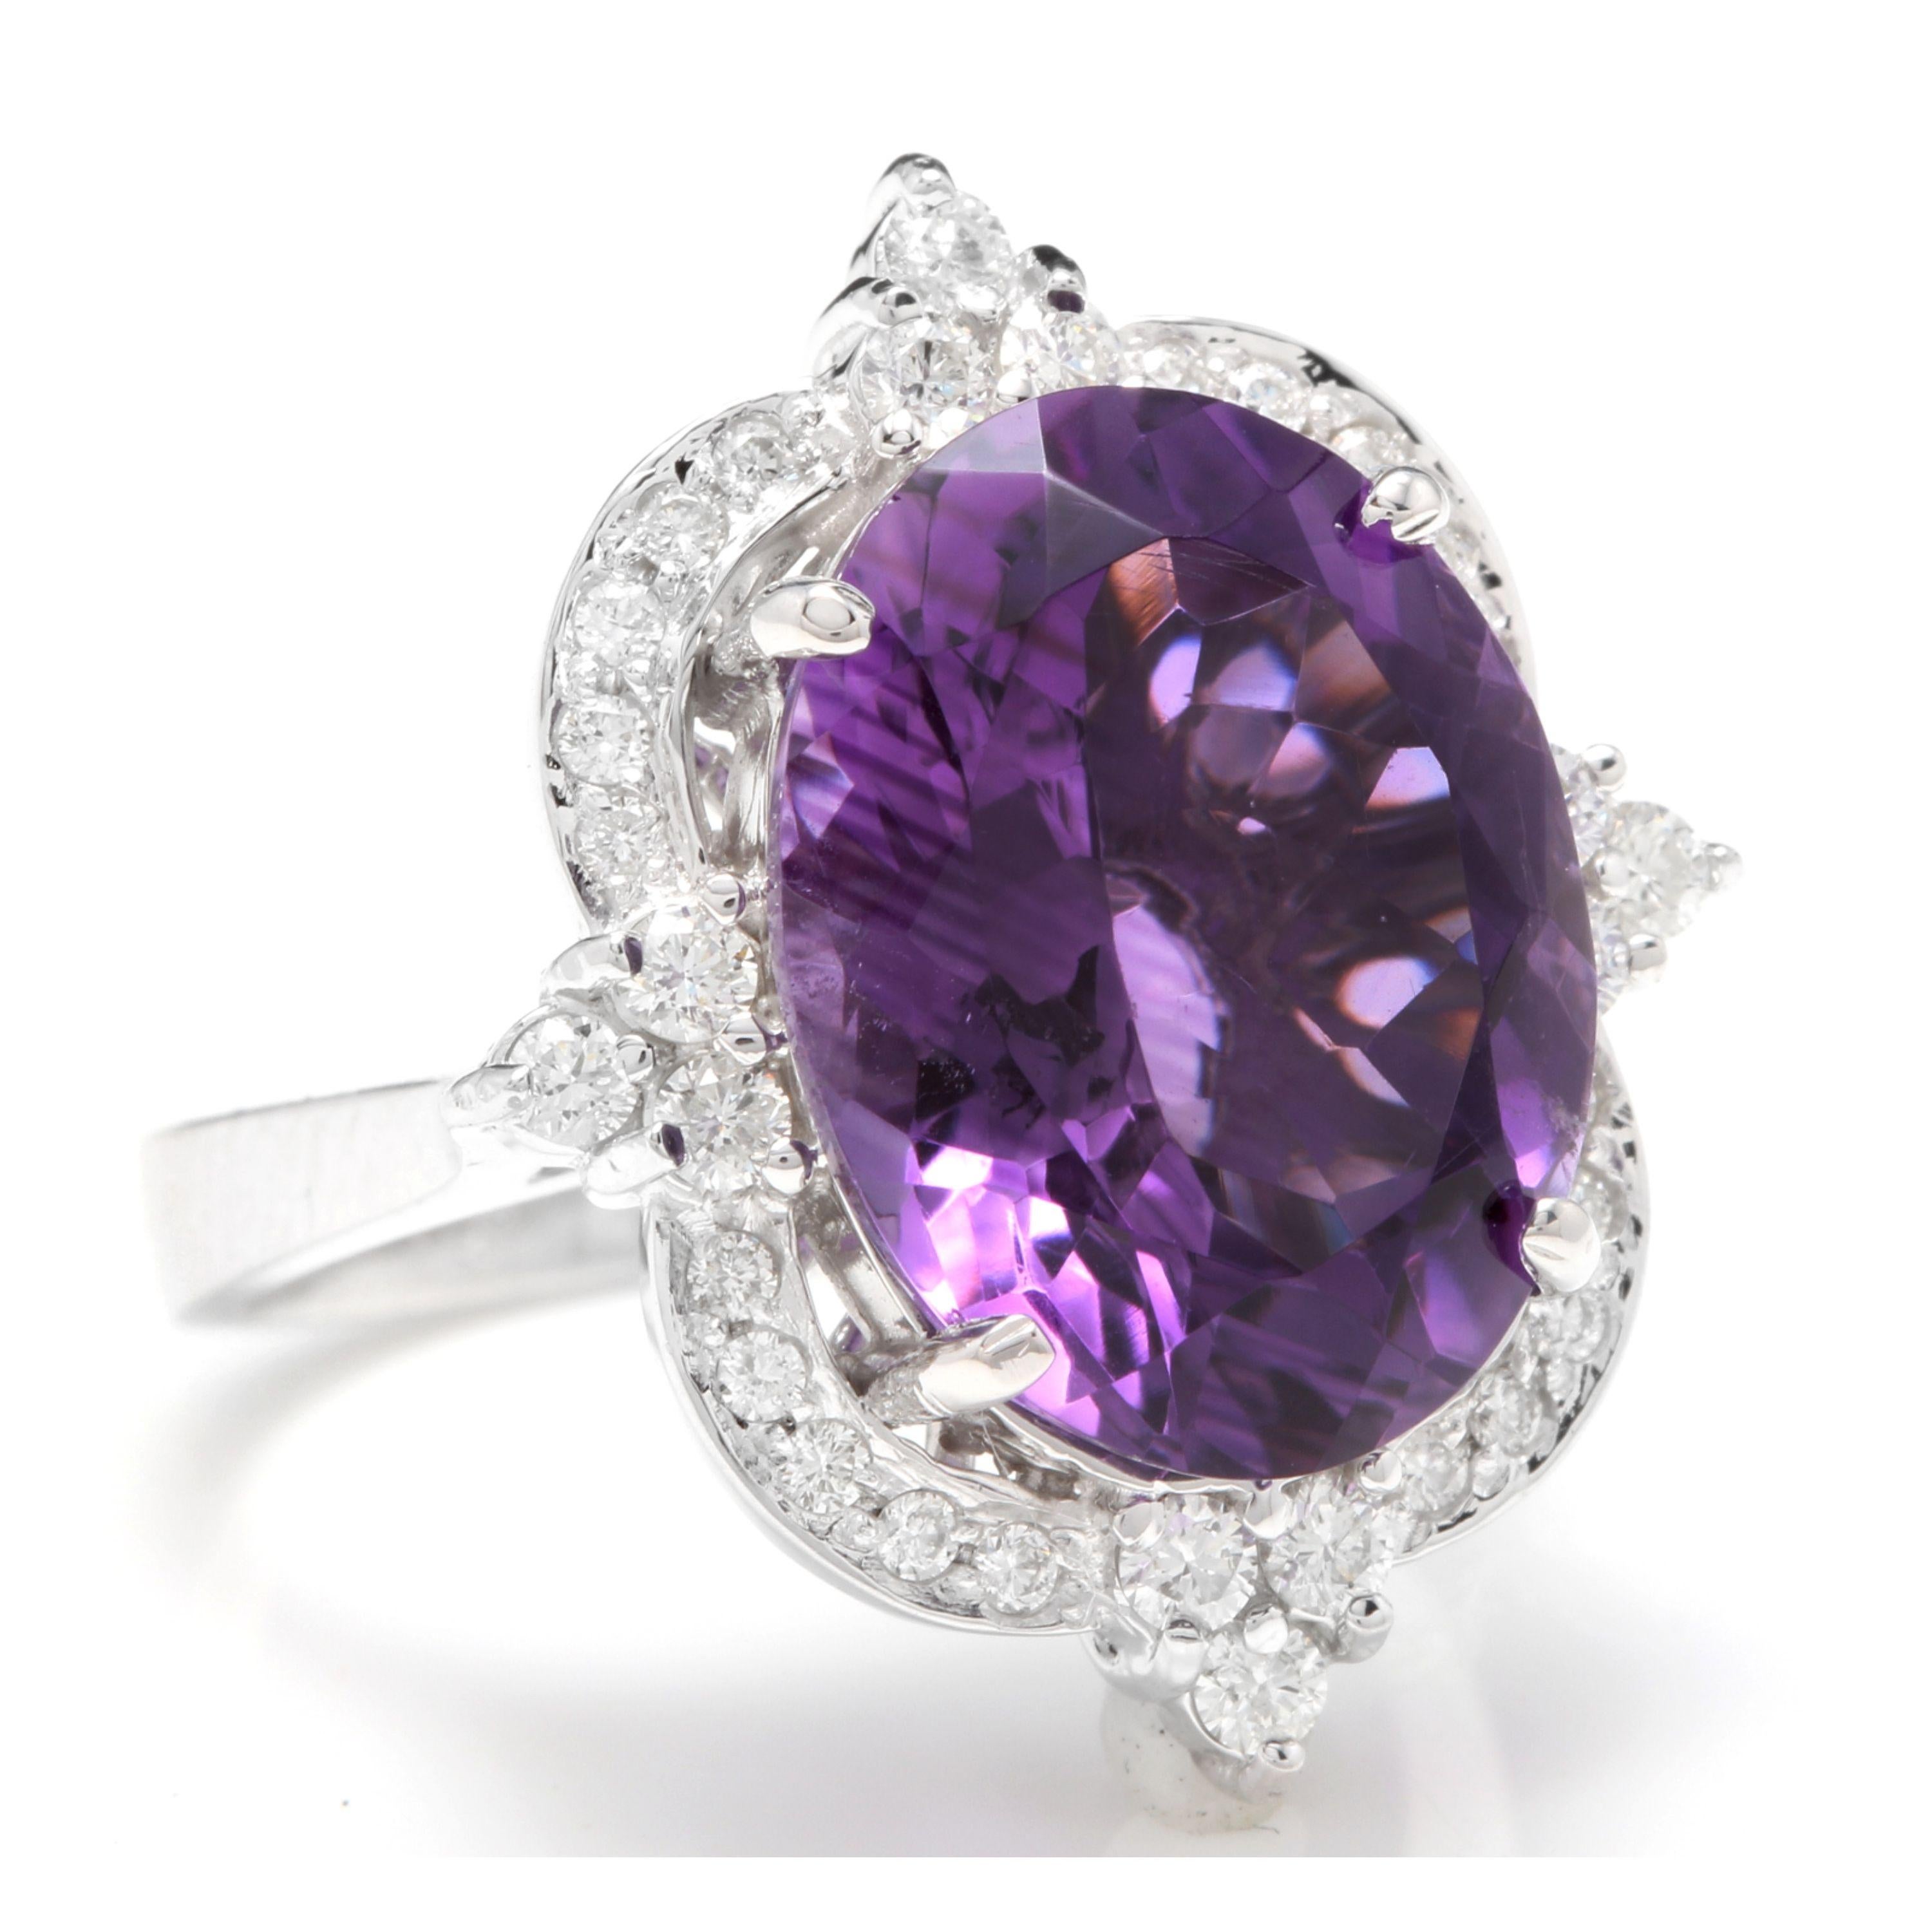 9.75 Carats Natural Impressive Amethyst and Diamond 14K Solid White Gold Ring

Total Natural Oval Amethyst Weight is: Approx. 9.00 Carats

Amethyst Measures: Approx. 16 x 12mm

Natural Round Diamonds Weight: Approx. 0.75 Carats (color G-H / Clarity